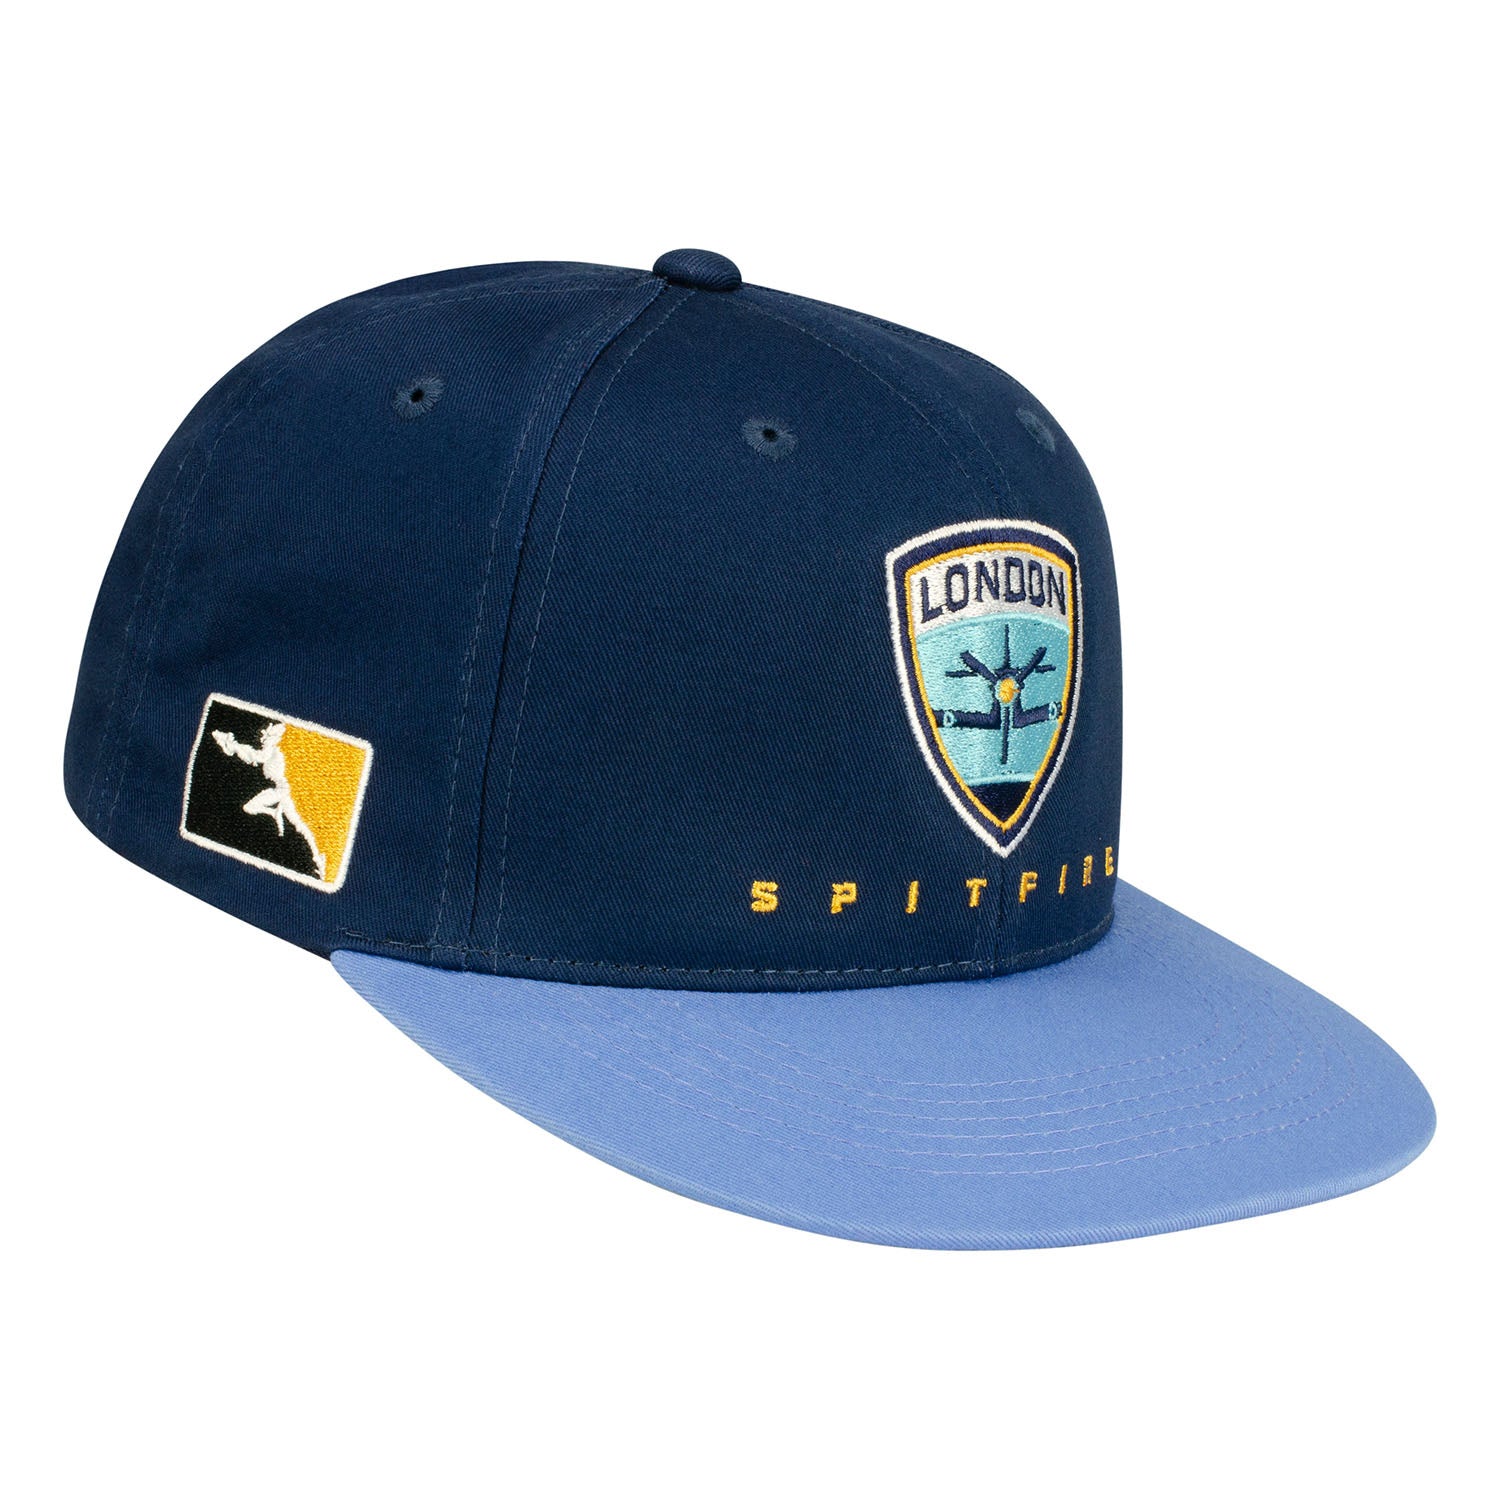 London Spitfire Blue Snapback Hat - Right View